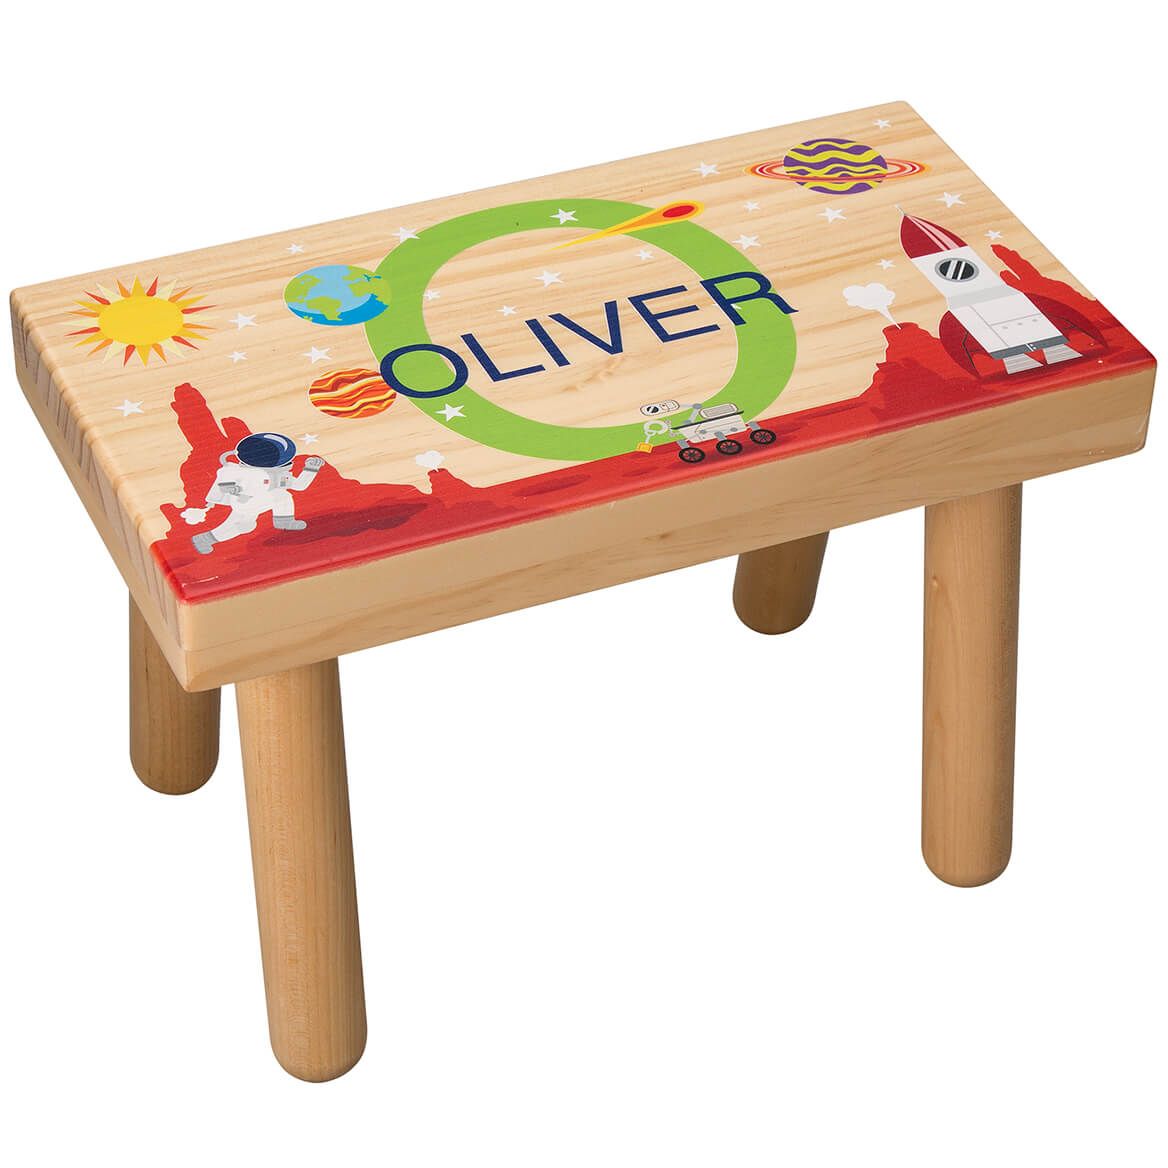 Personalized Space-Themed Children's Step Stool + '-' + 368056